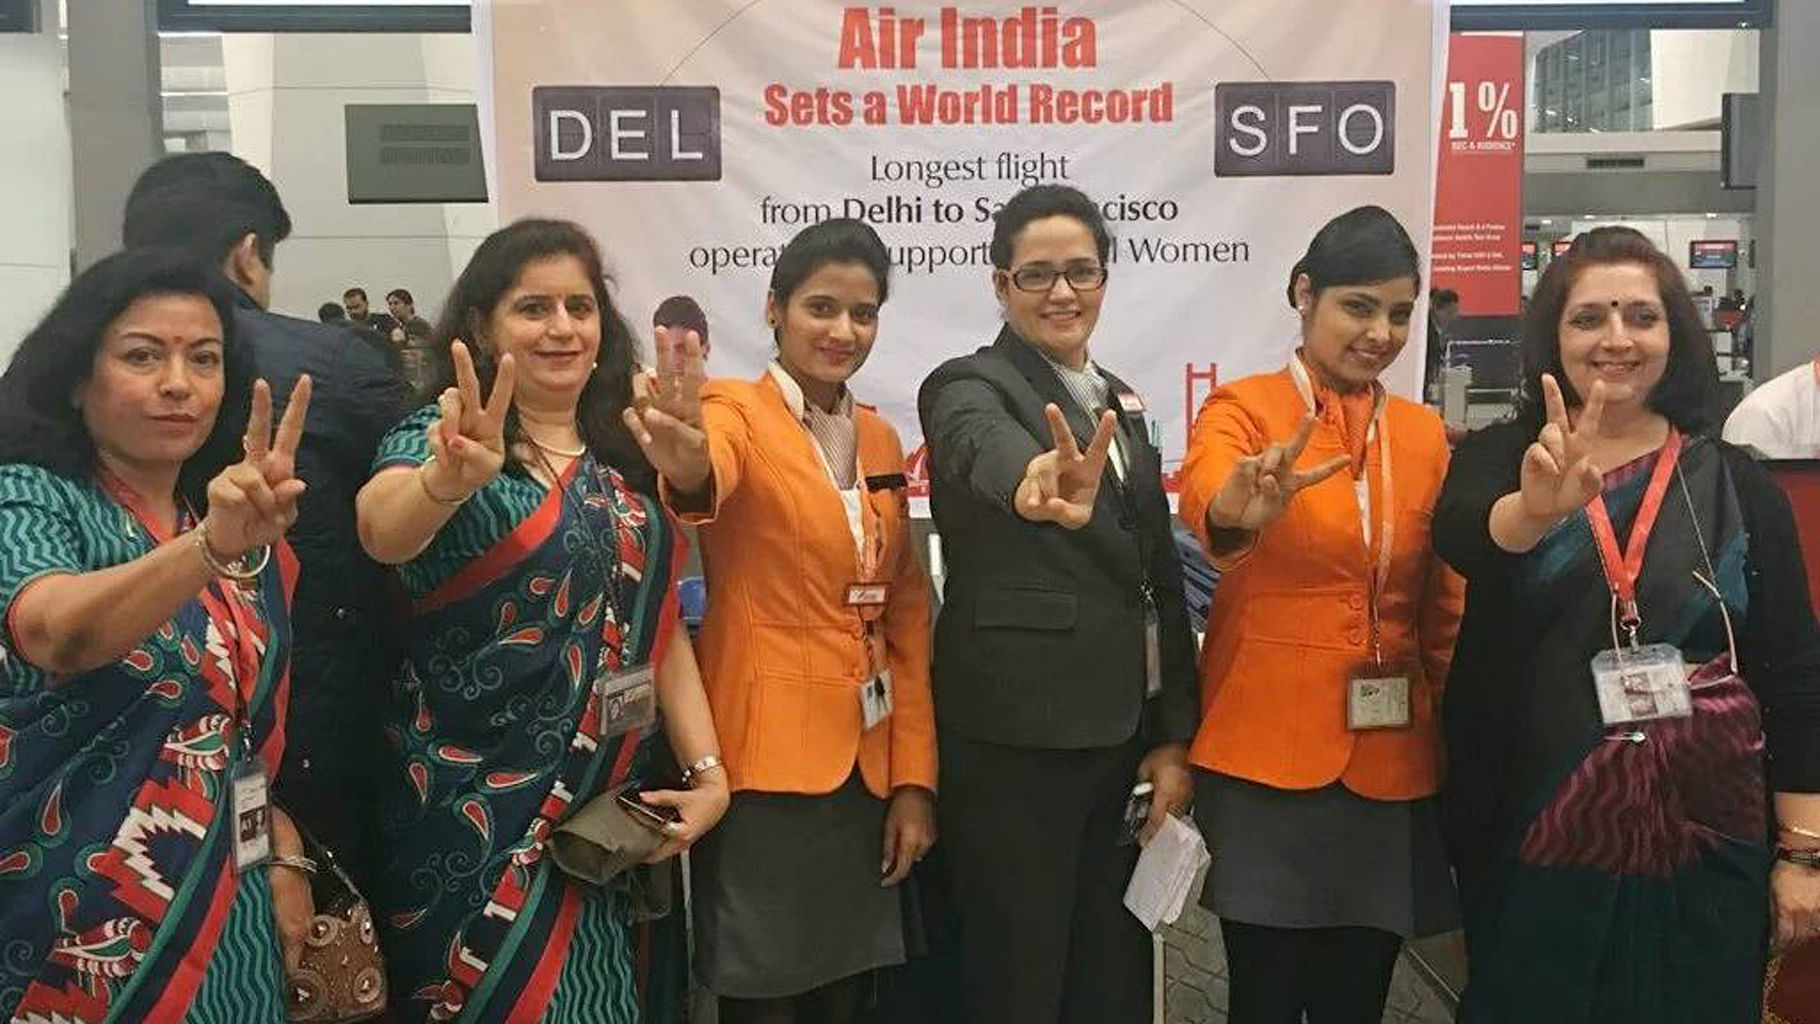 Celebrating the take-off of the longest operated flight with all women crew. (Photo: Facebook/<a href="https://www.facebook.com/AirIndia/photos/a.591175584357647.1073741845.251462618328947/691110974364107/?type=3&amp;theater">Air India</a>)